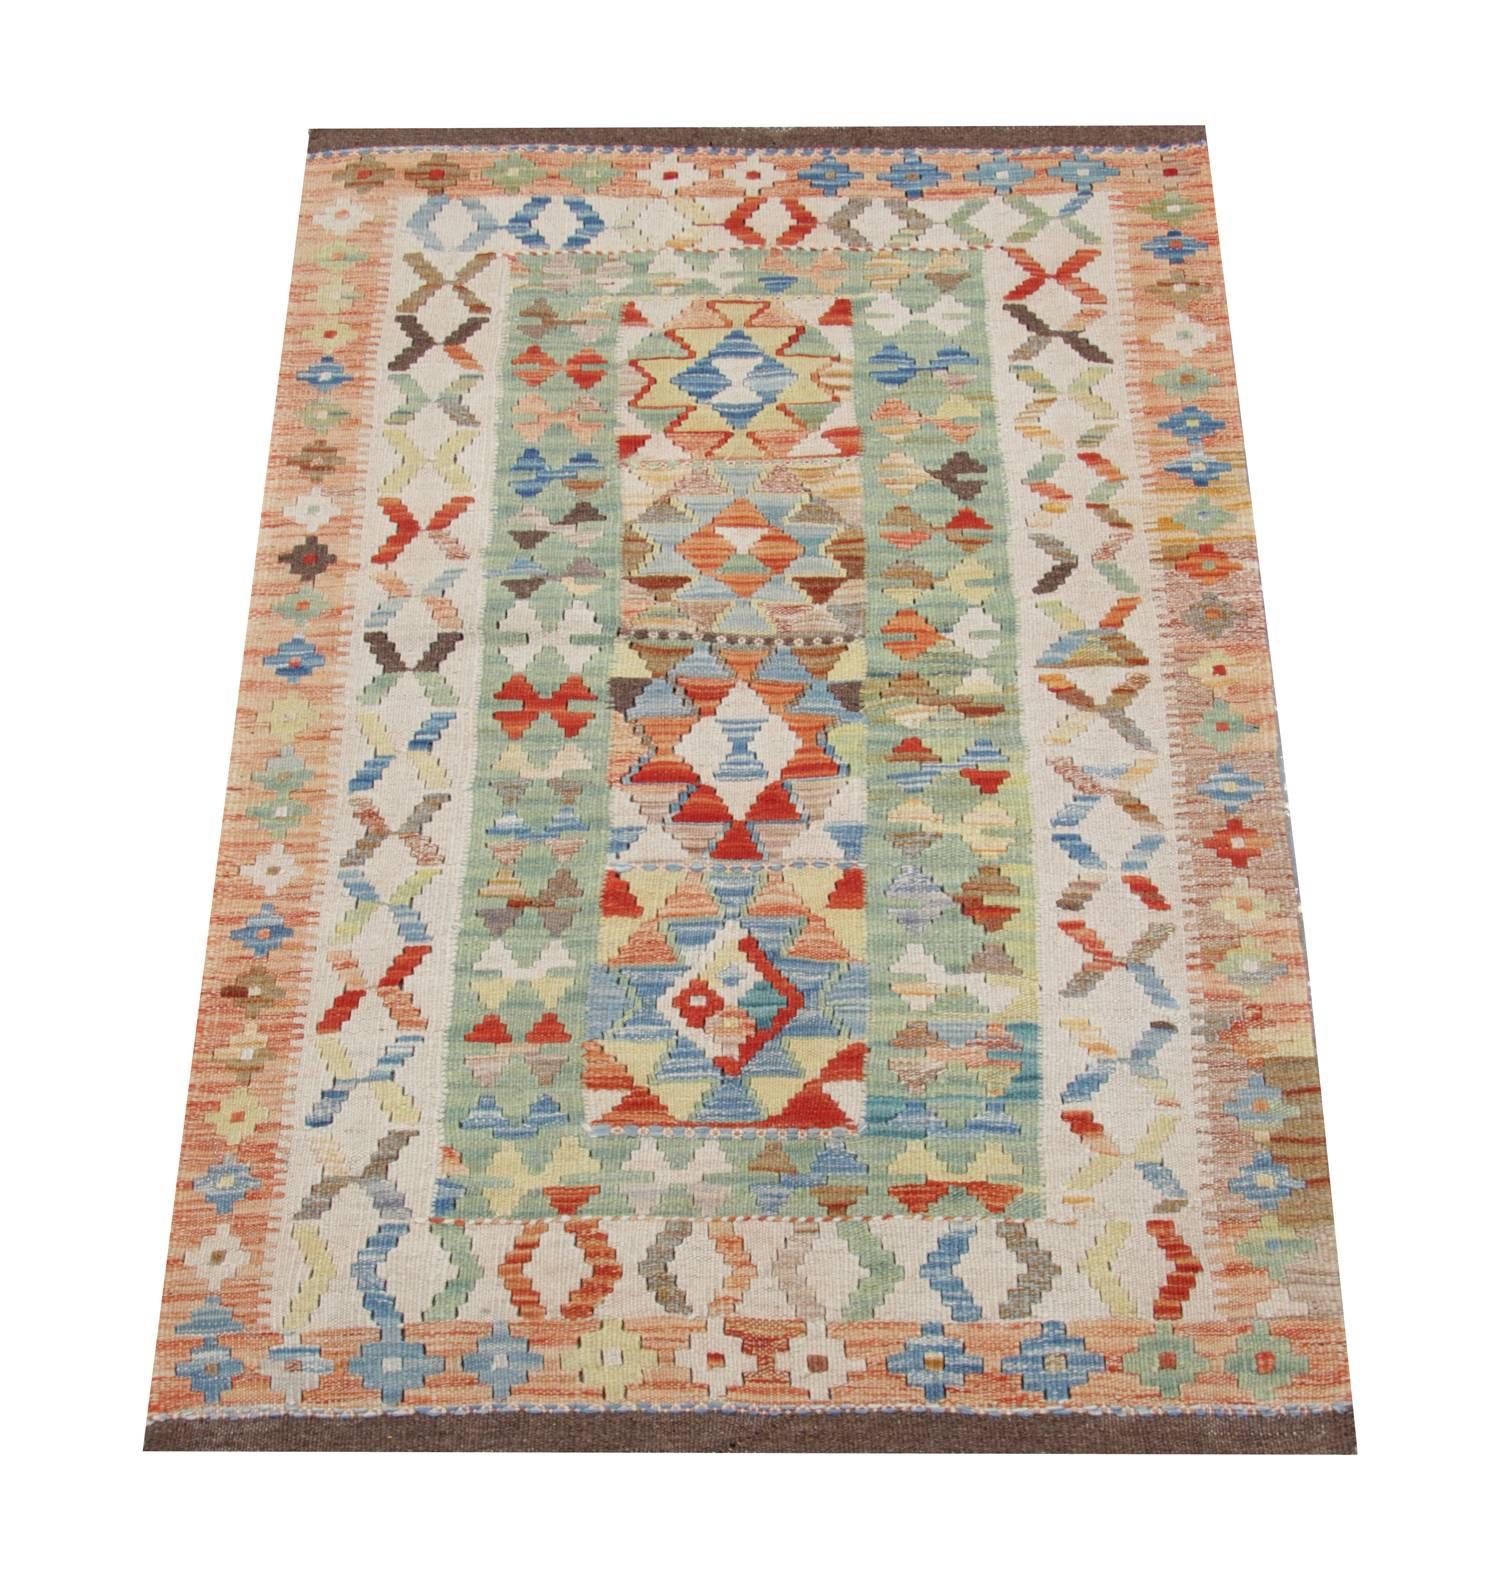 This geometric rug is handmade in the North of Afghanistan by Uzbek and Turkmen tribes. The materials used for this flat weave rug are wool and cotton. For the production of these luxury rugs have been used only organic dyes too. This geometric rug